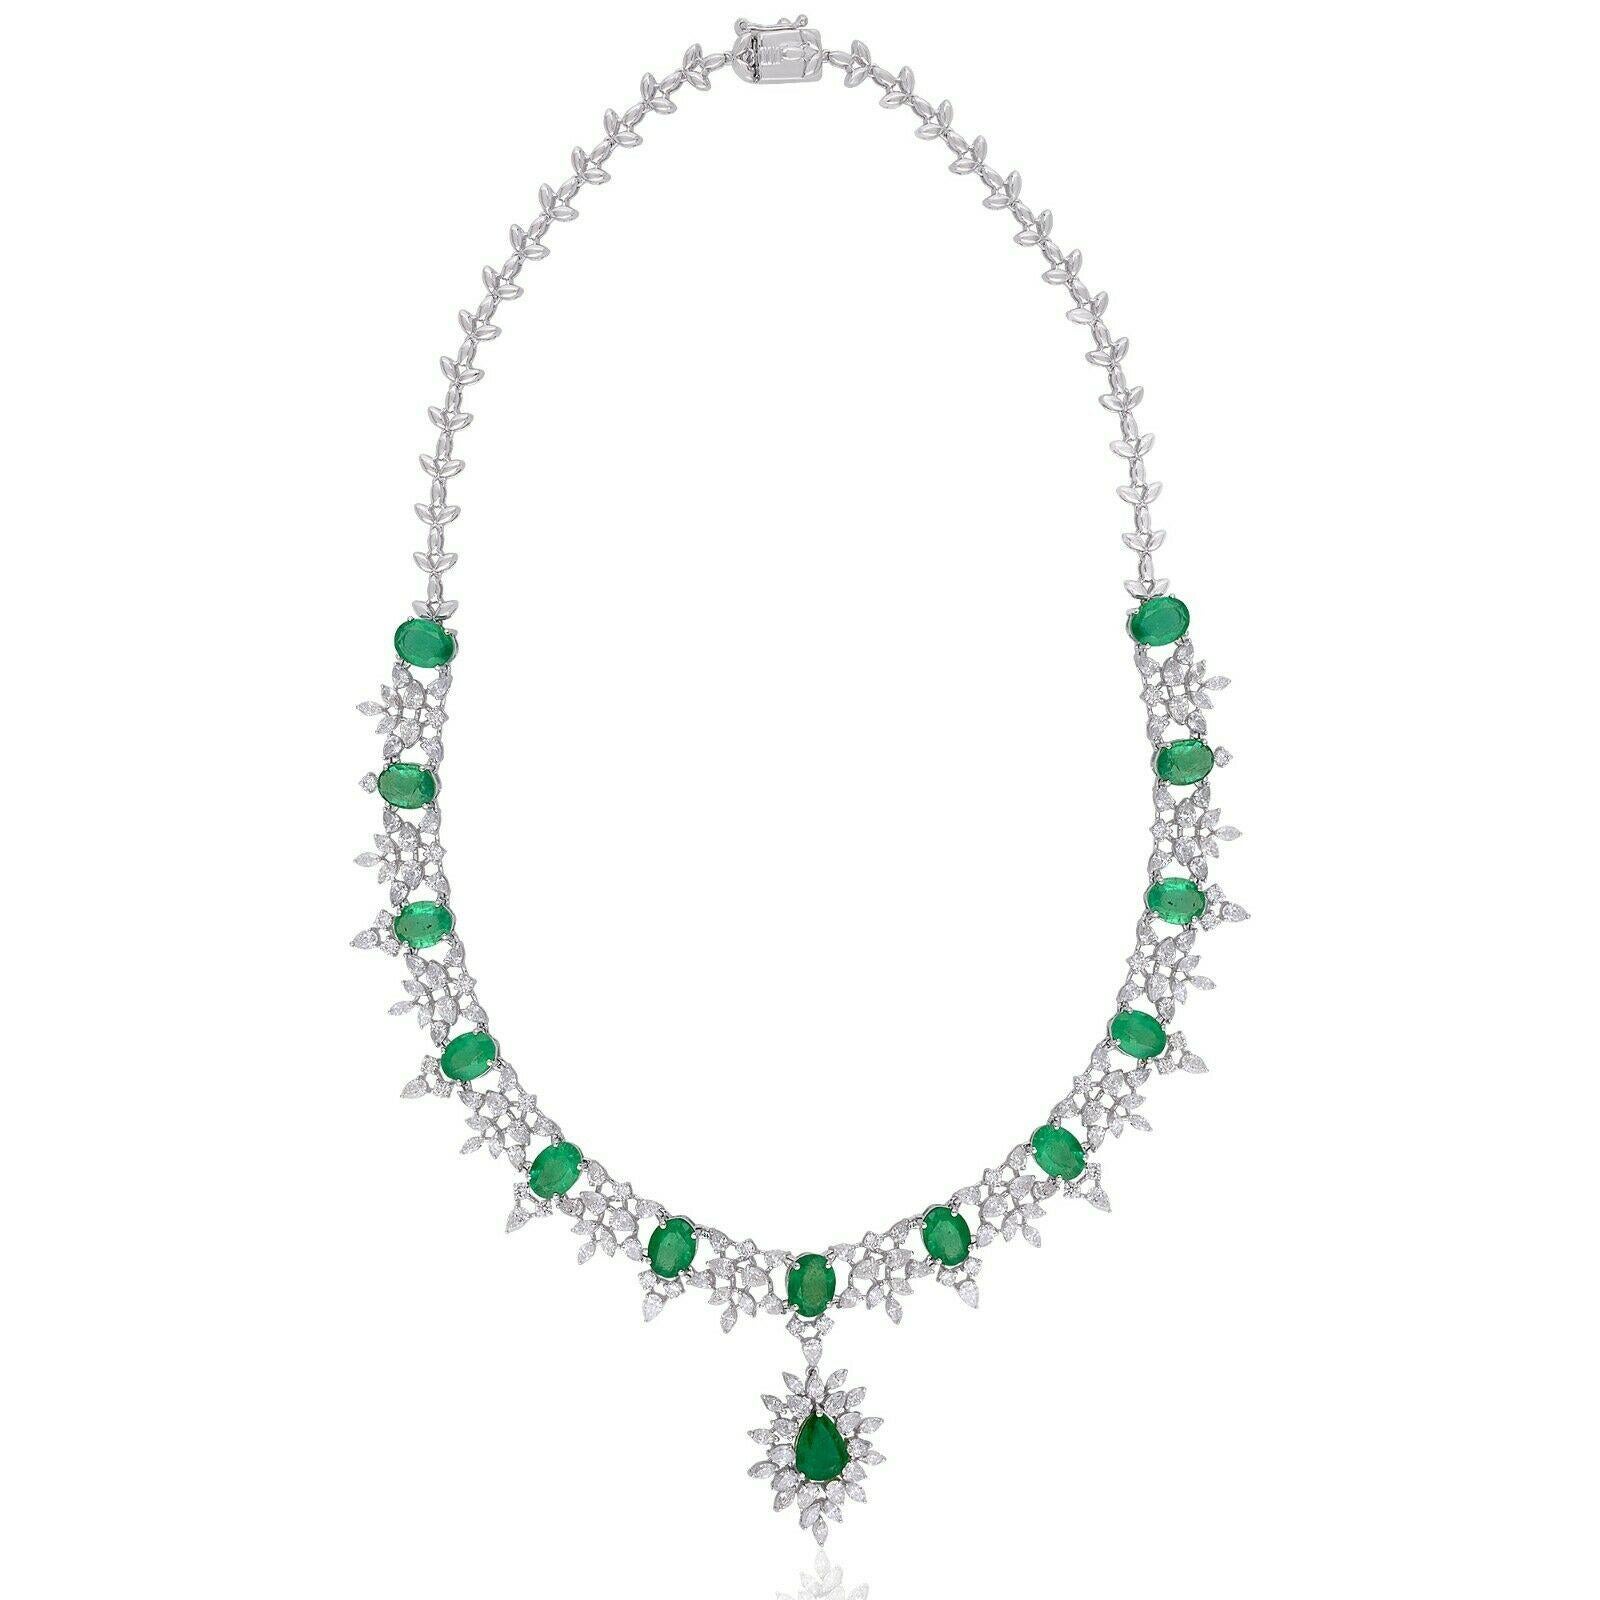 Cast from 14-karat gold, this exquisite necklace is hand set with 16.48 carats Emerald and 12.0 carats of sparkling diamonds. 

FOLLOW MEGHNA JEWELS storefront to view the latest collection & exclusive pieces. Meghna Jewels is proudly rated as a Top